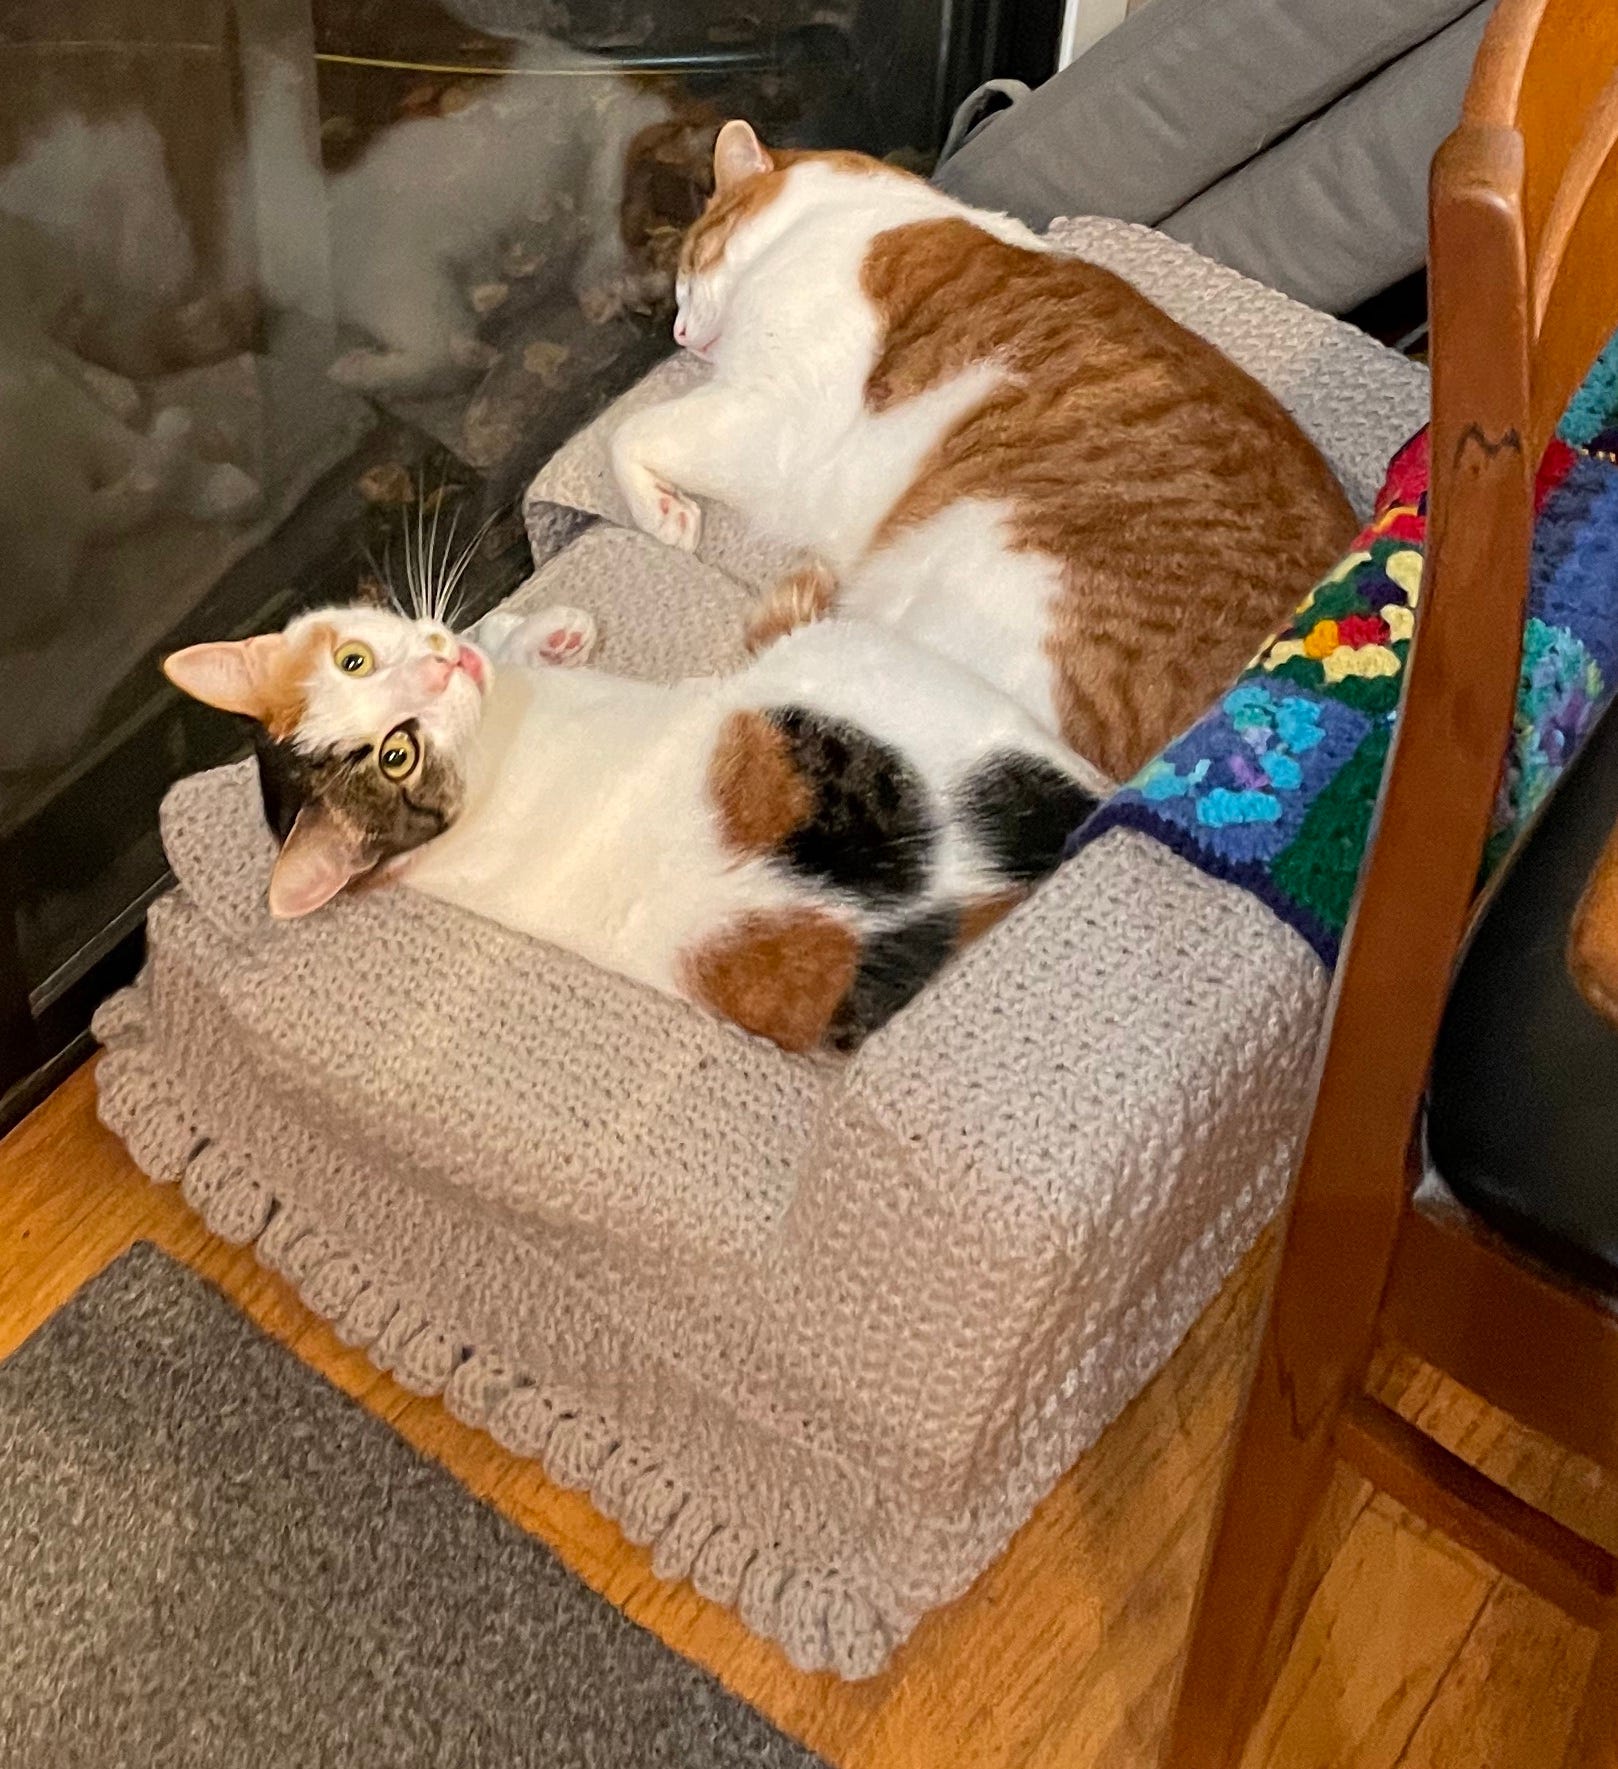 two cats, one calico and one orange, on a crocheted cat-sized couch